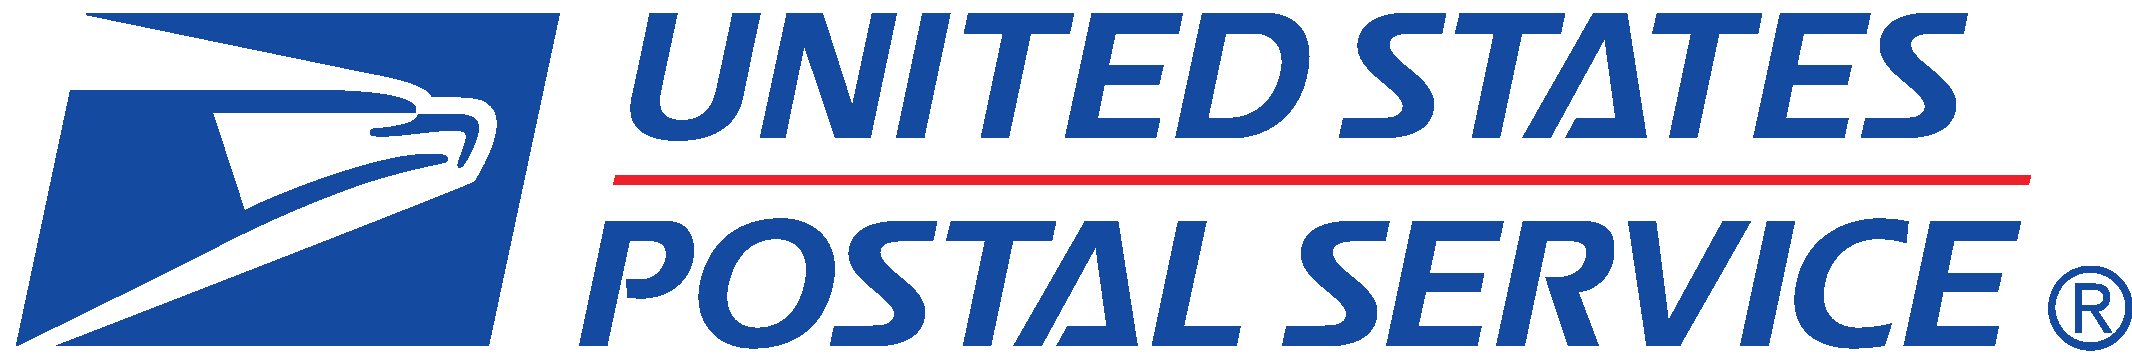 Usps Logo Vector Eps Free Download Logo Icons Clipart - United States Postal Service (2132x359)